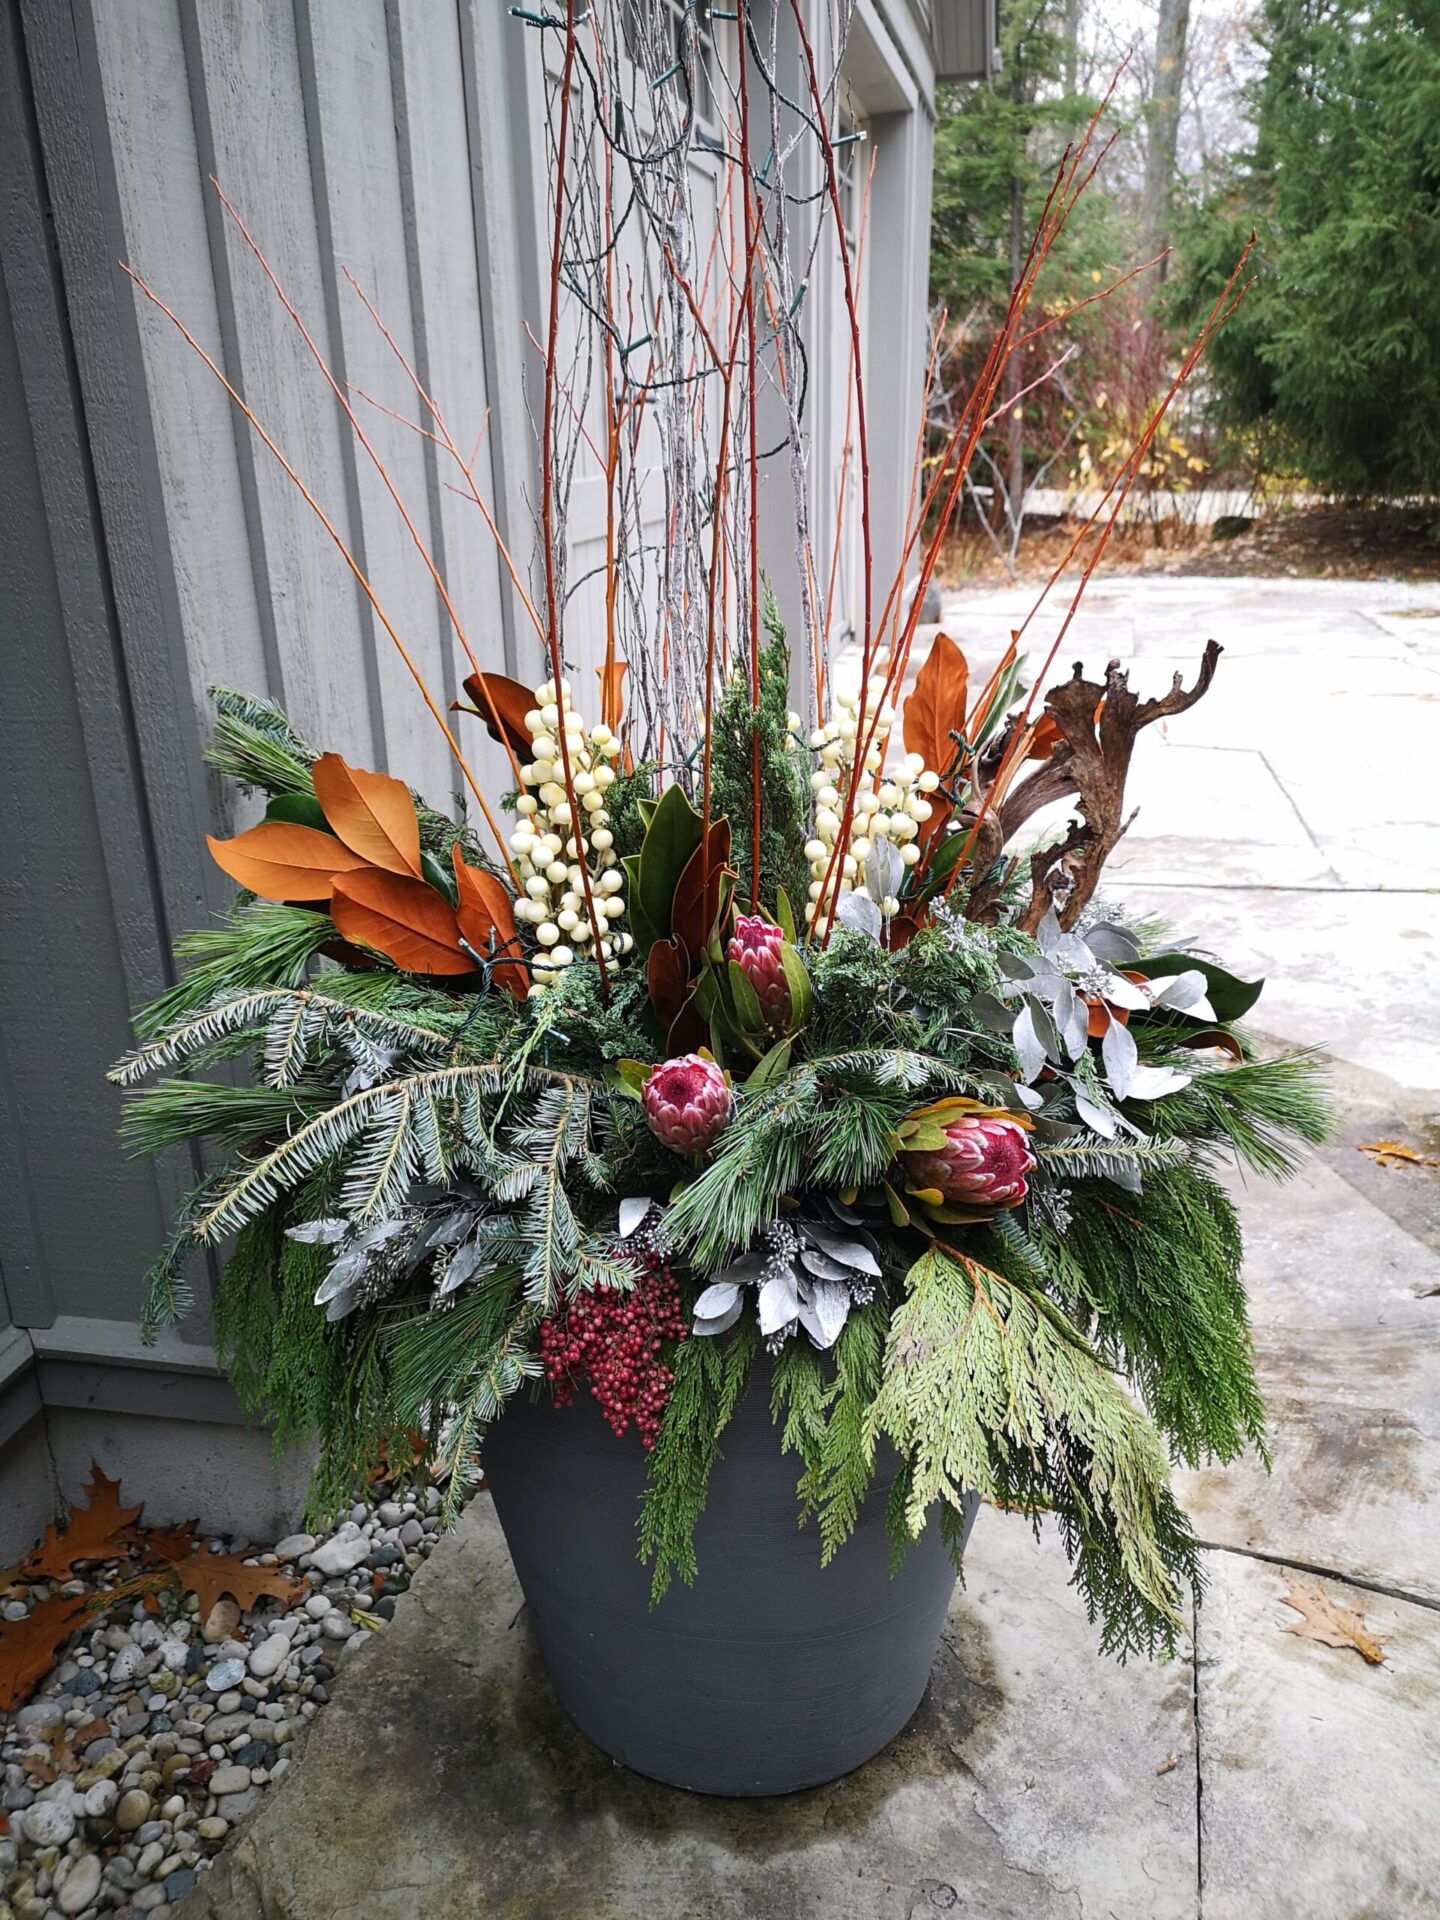 A winter-themed plant arrangement in a grey pot, featuring evergreens, berries, pinecones, and twigs, against a wooden house siding with a natural backdrop.